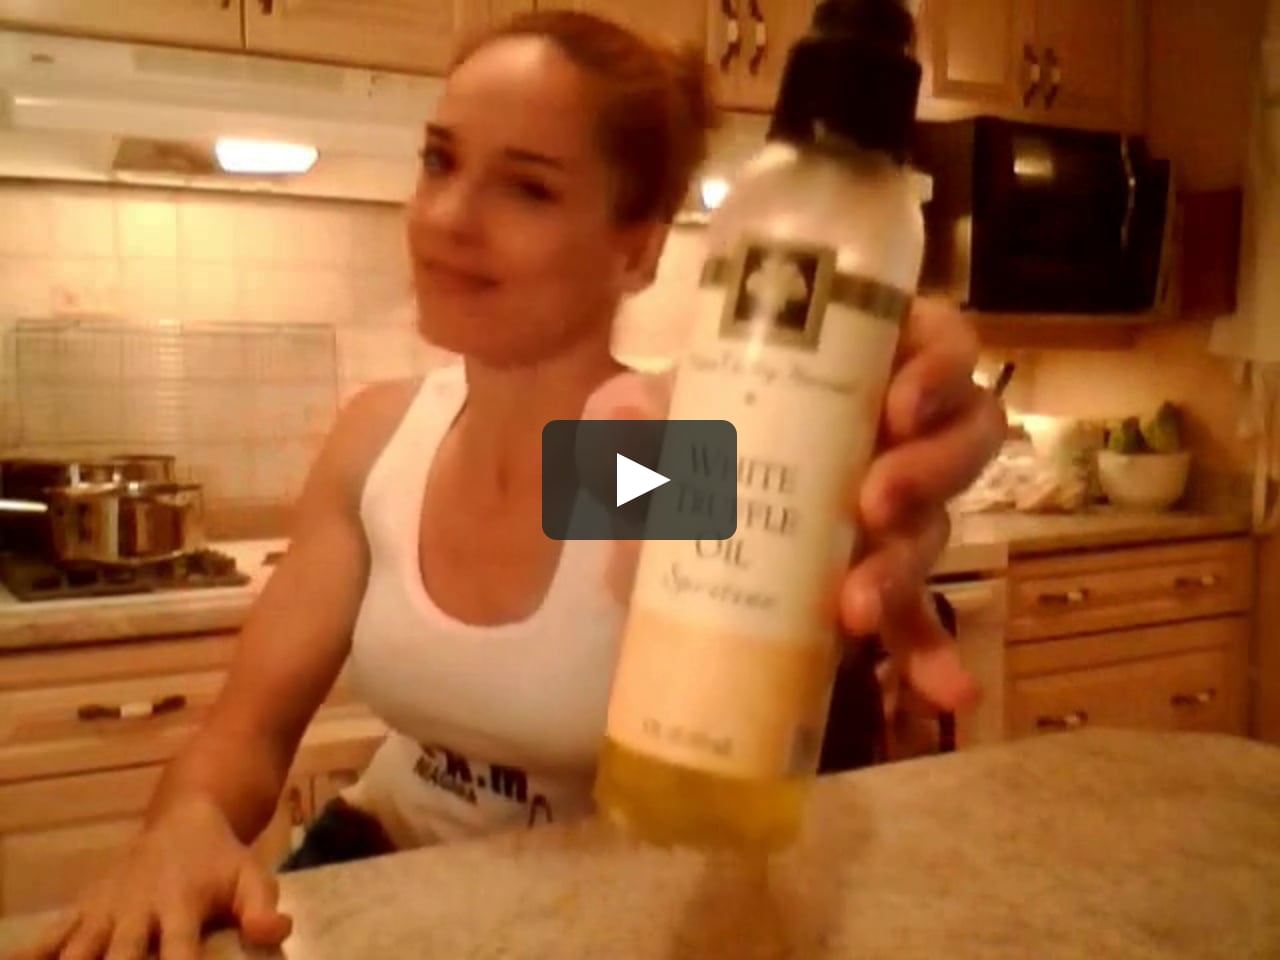 Napa Valley Harvest White Truffle Oil Spritzer: What I Say About Food on Vimeo